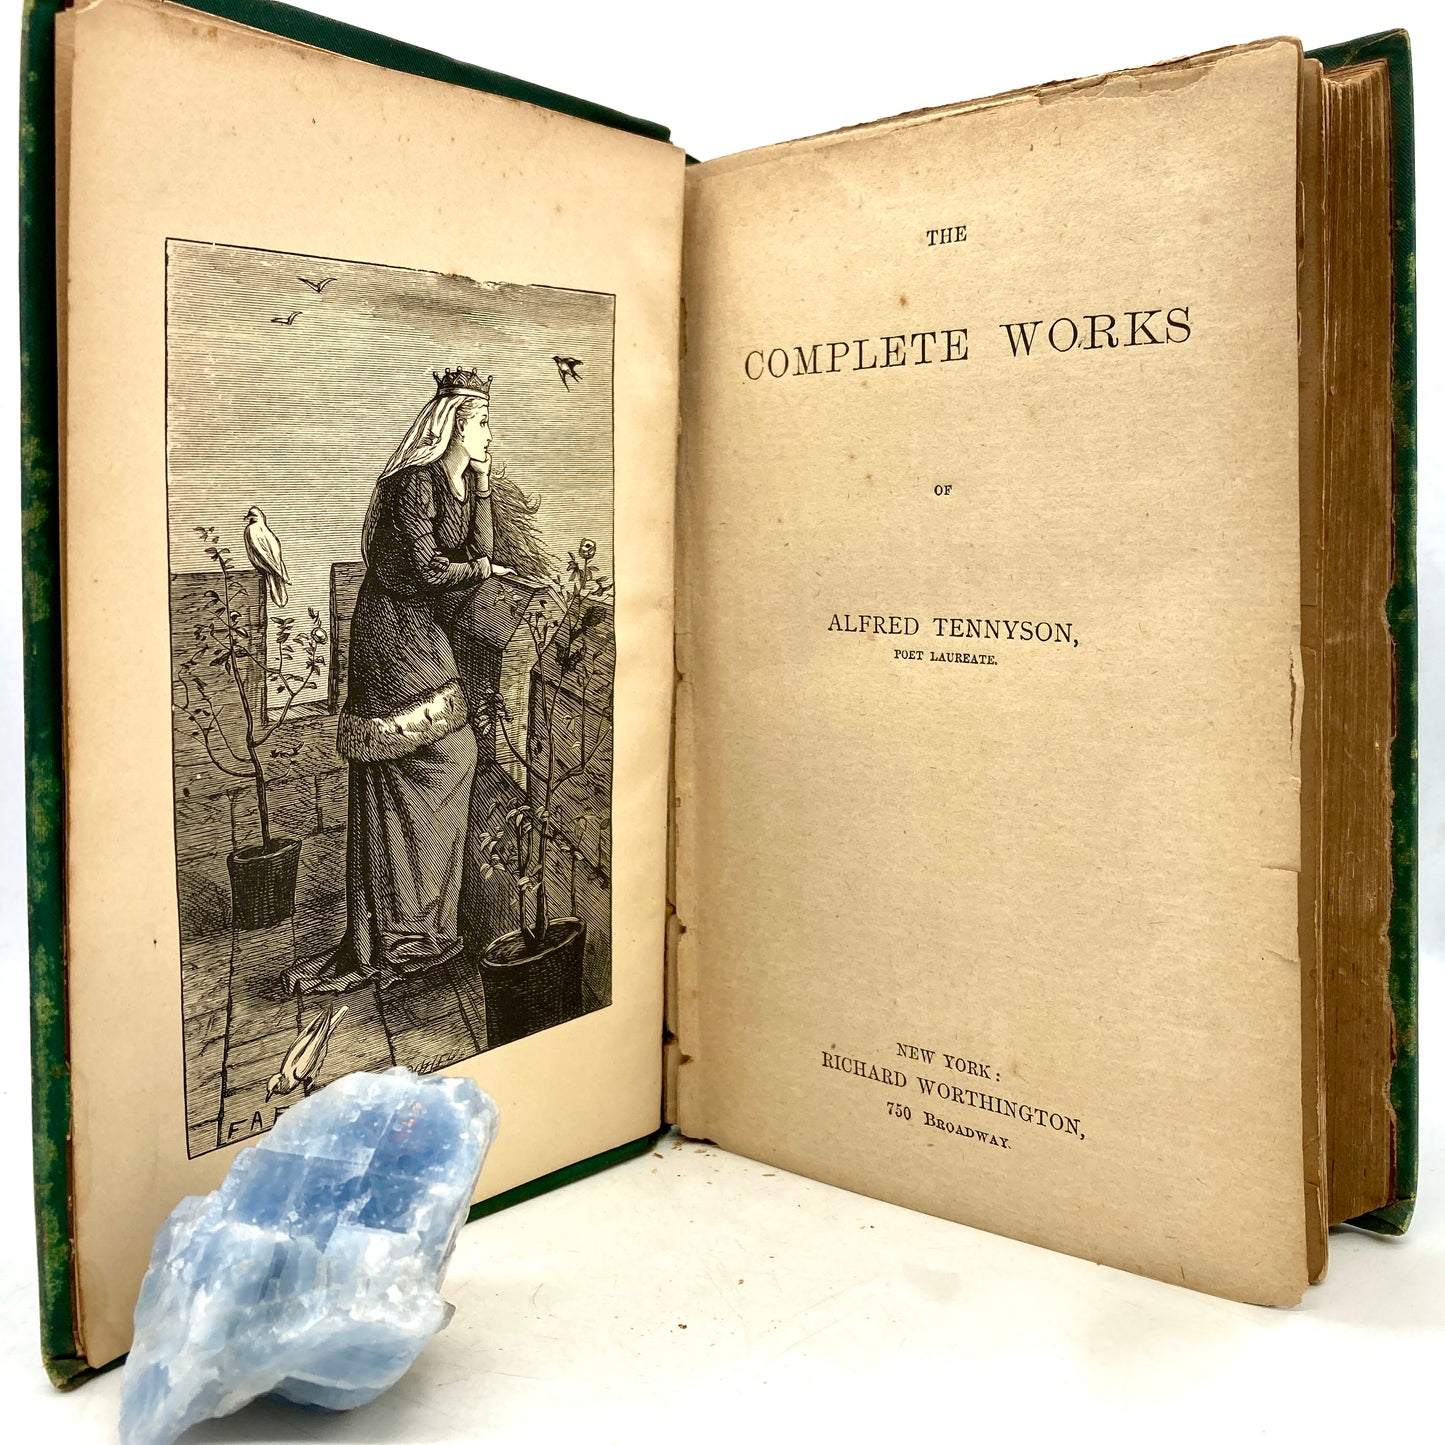 TENNYSON, Alfred Lord "The Complete Works" [Worthington, n.d./c1880]